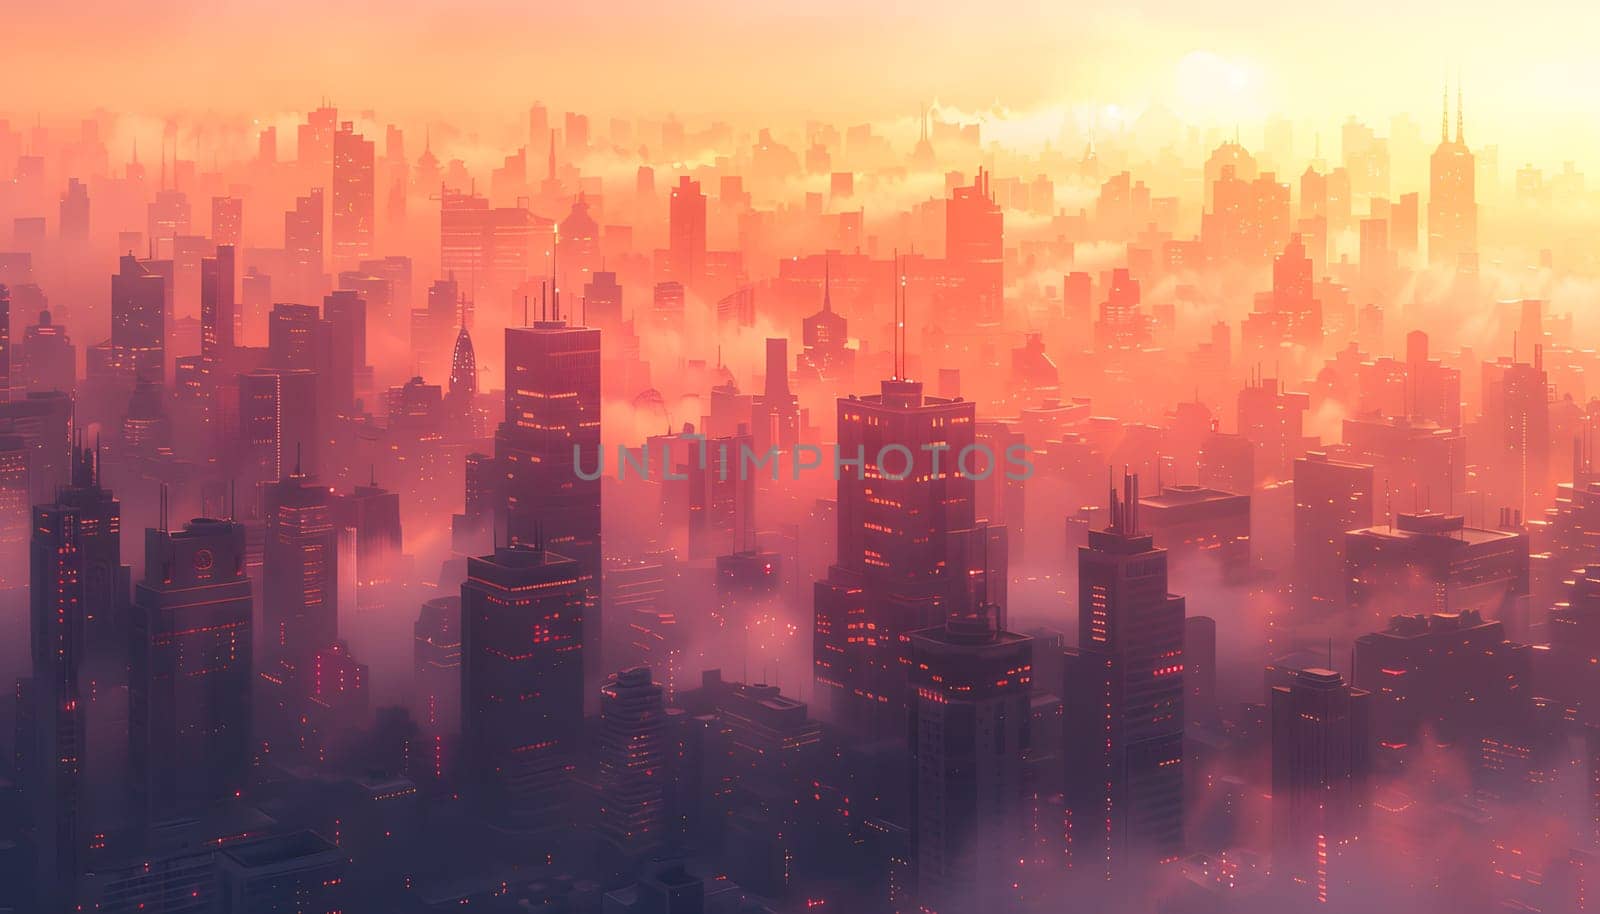 An atmospheric painting of a cityscape covered in fog during sunset, with skyscrapers emerging from the clouds against a backdrop of pink and red sky at dusk